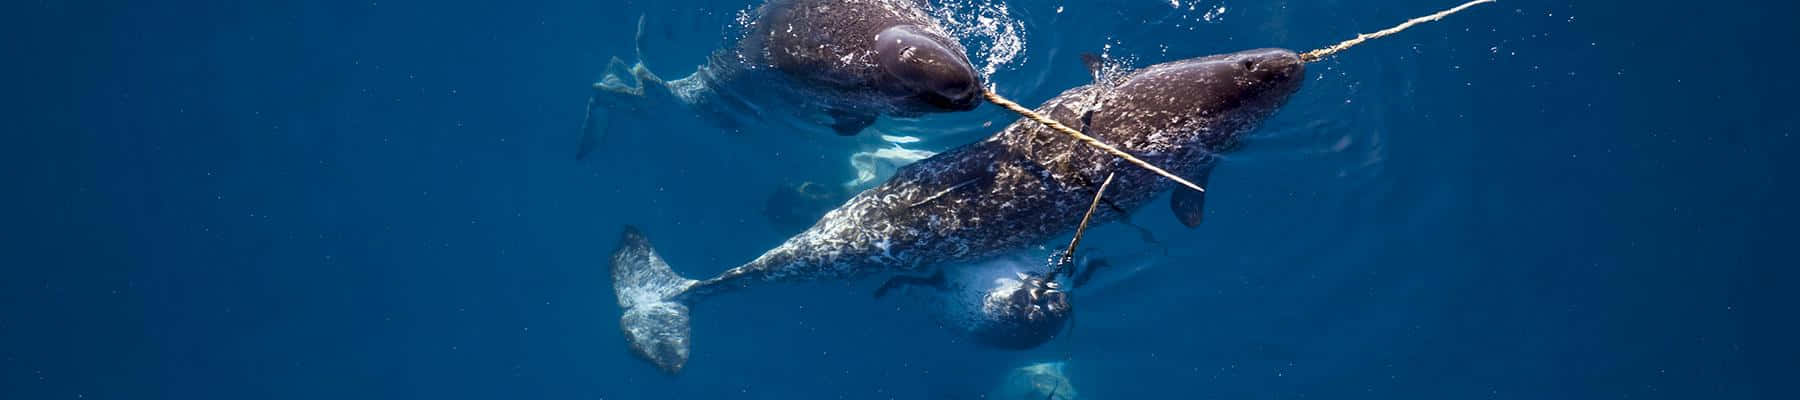 A narwhal swimming near the Canadian coastline.